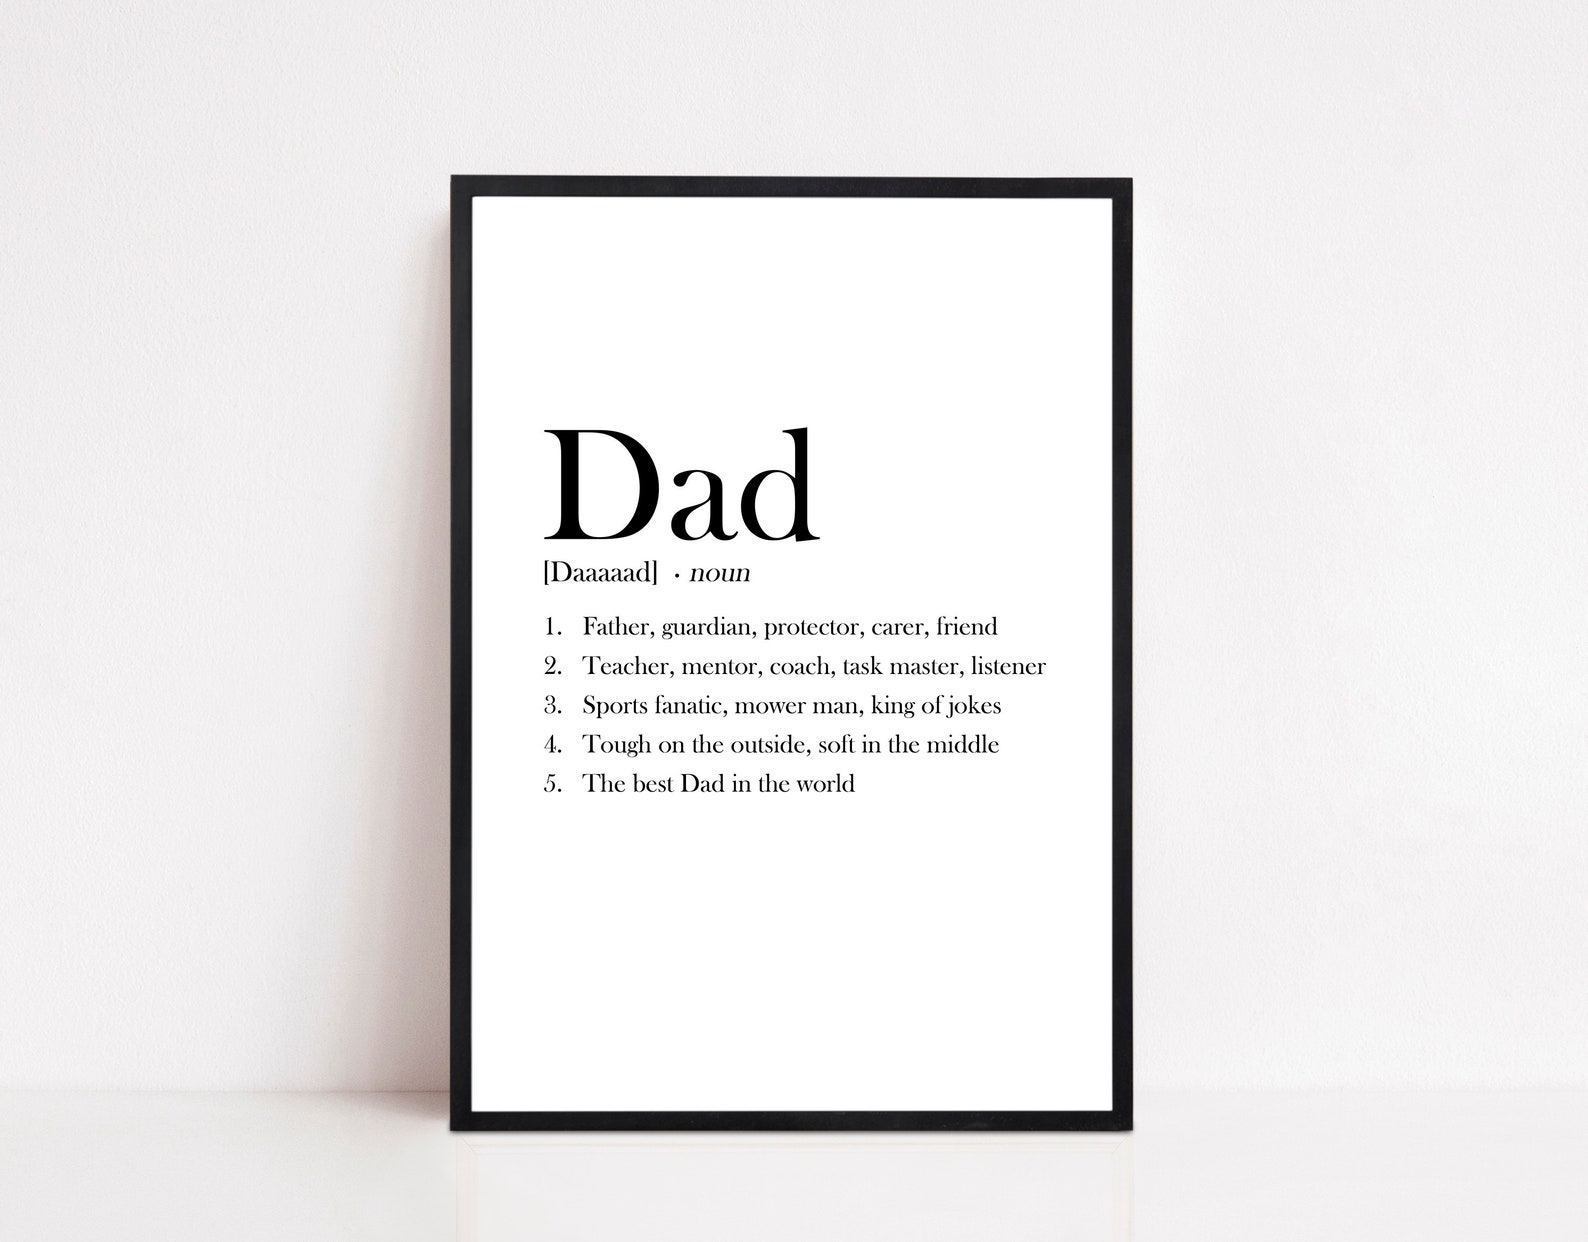 Dad meaning